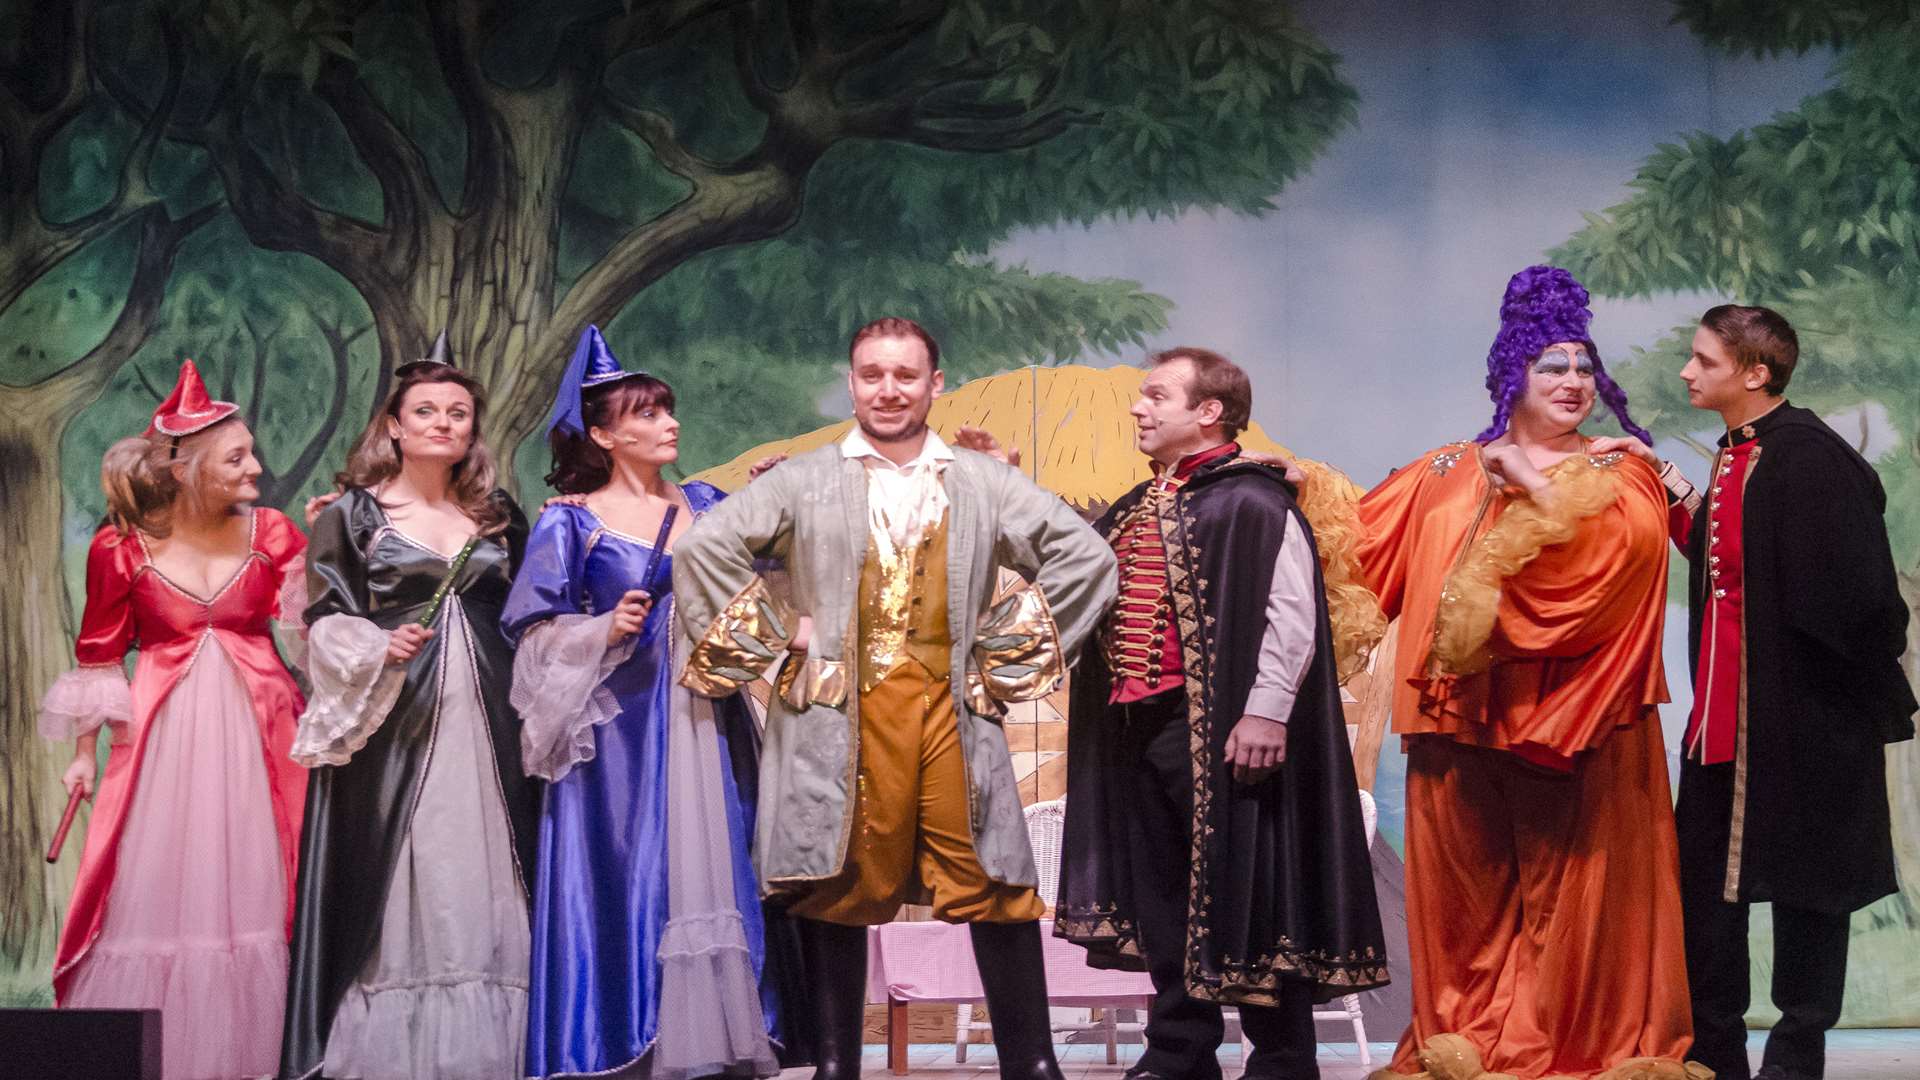 Margate Operatic Society's production of Sleeping Beauty Picture: Philippa Myhill of Photogenic Photography